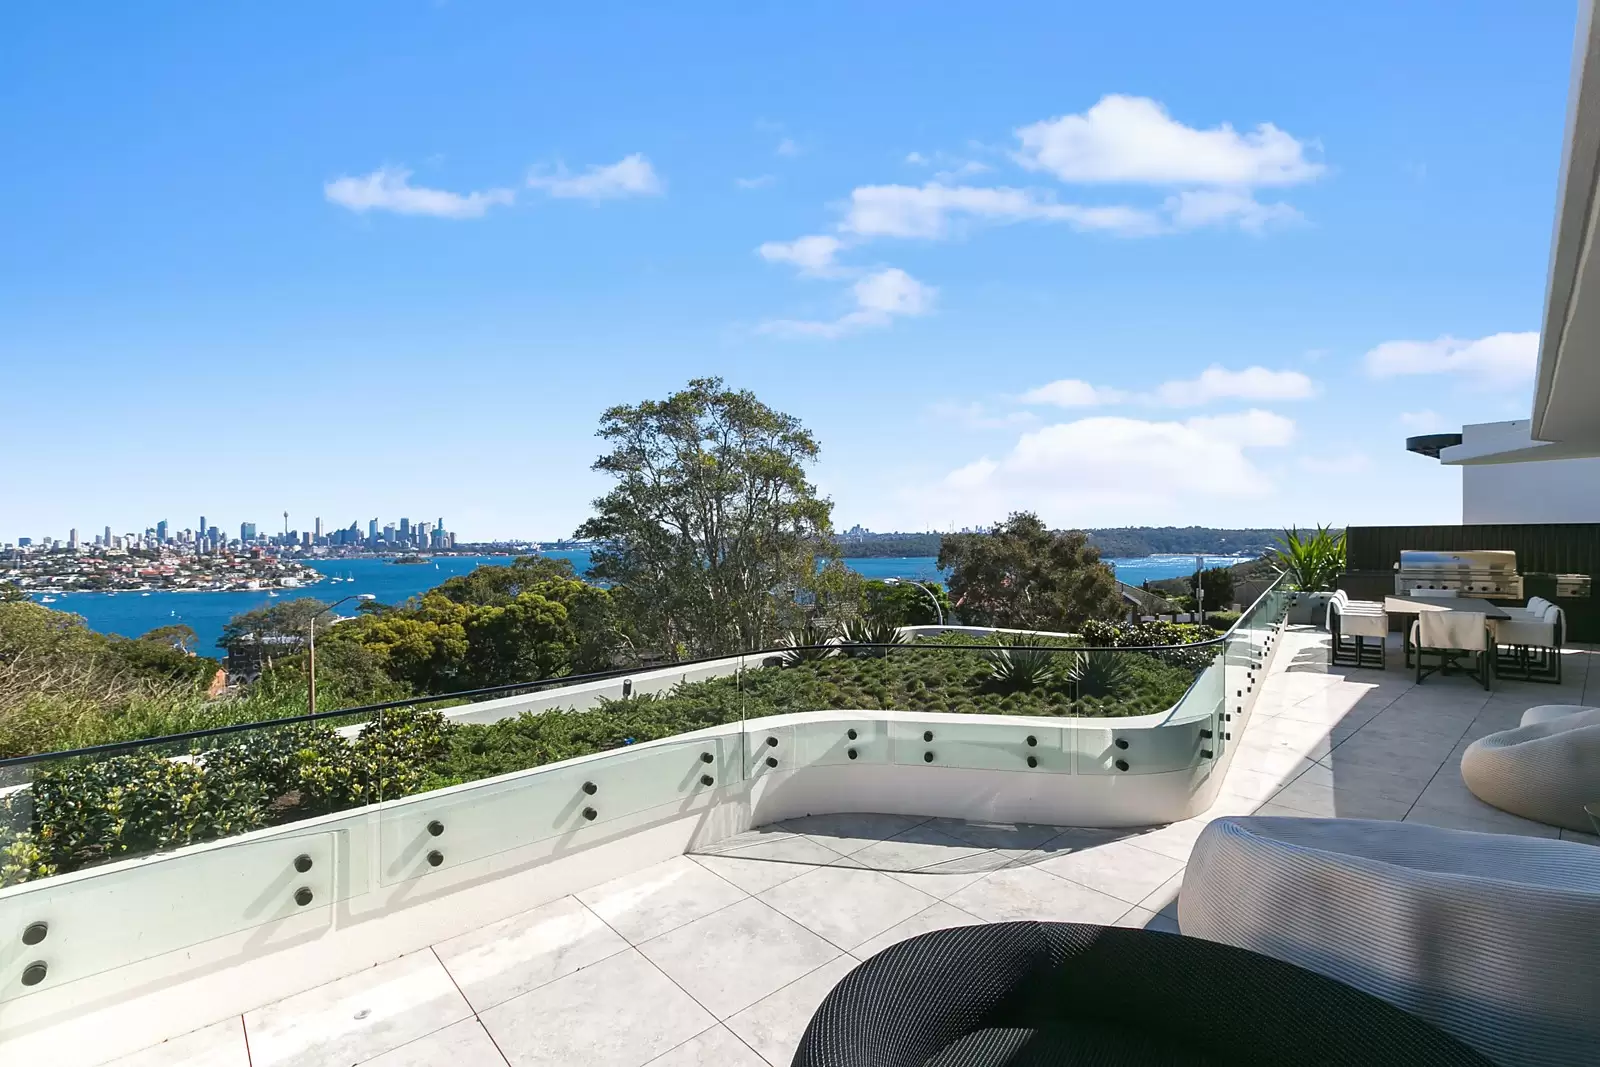 Photo #14: 5/30 Dalley Avenue, Vaucluse - Sold by Sydney Sotheby's International Realty